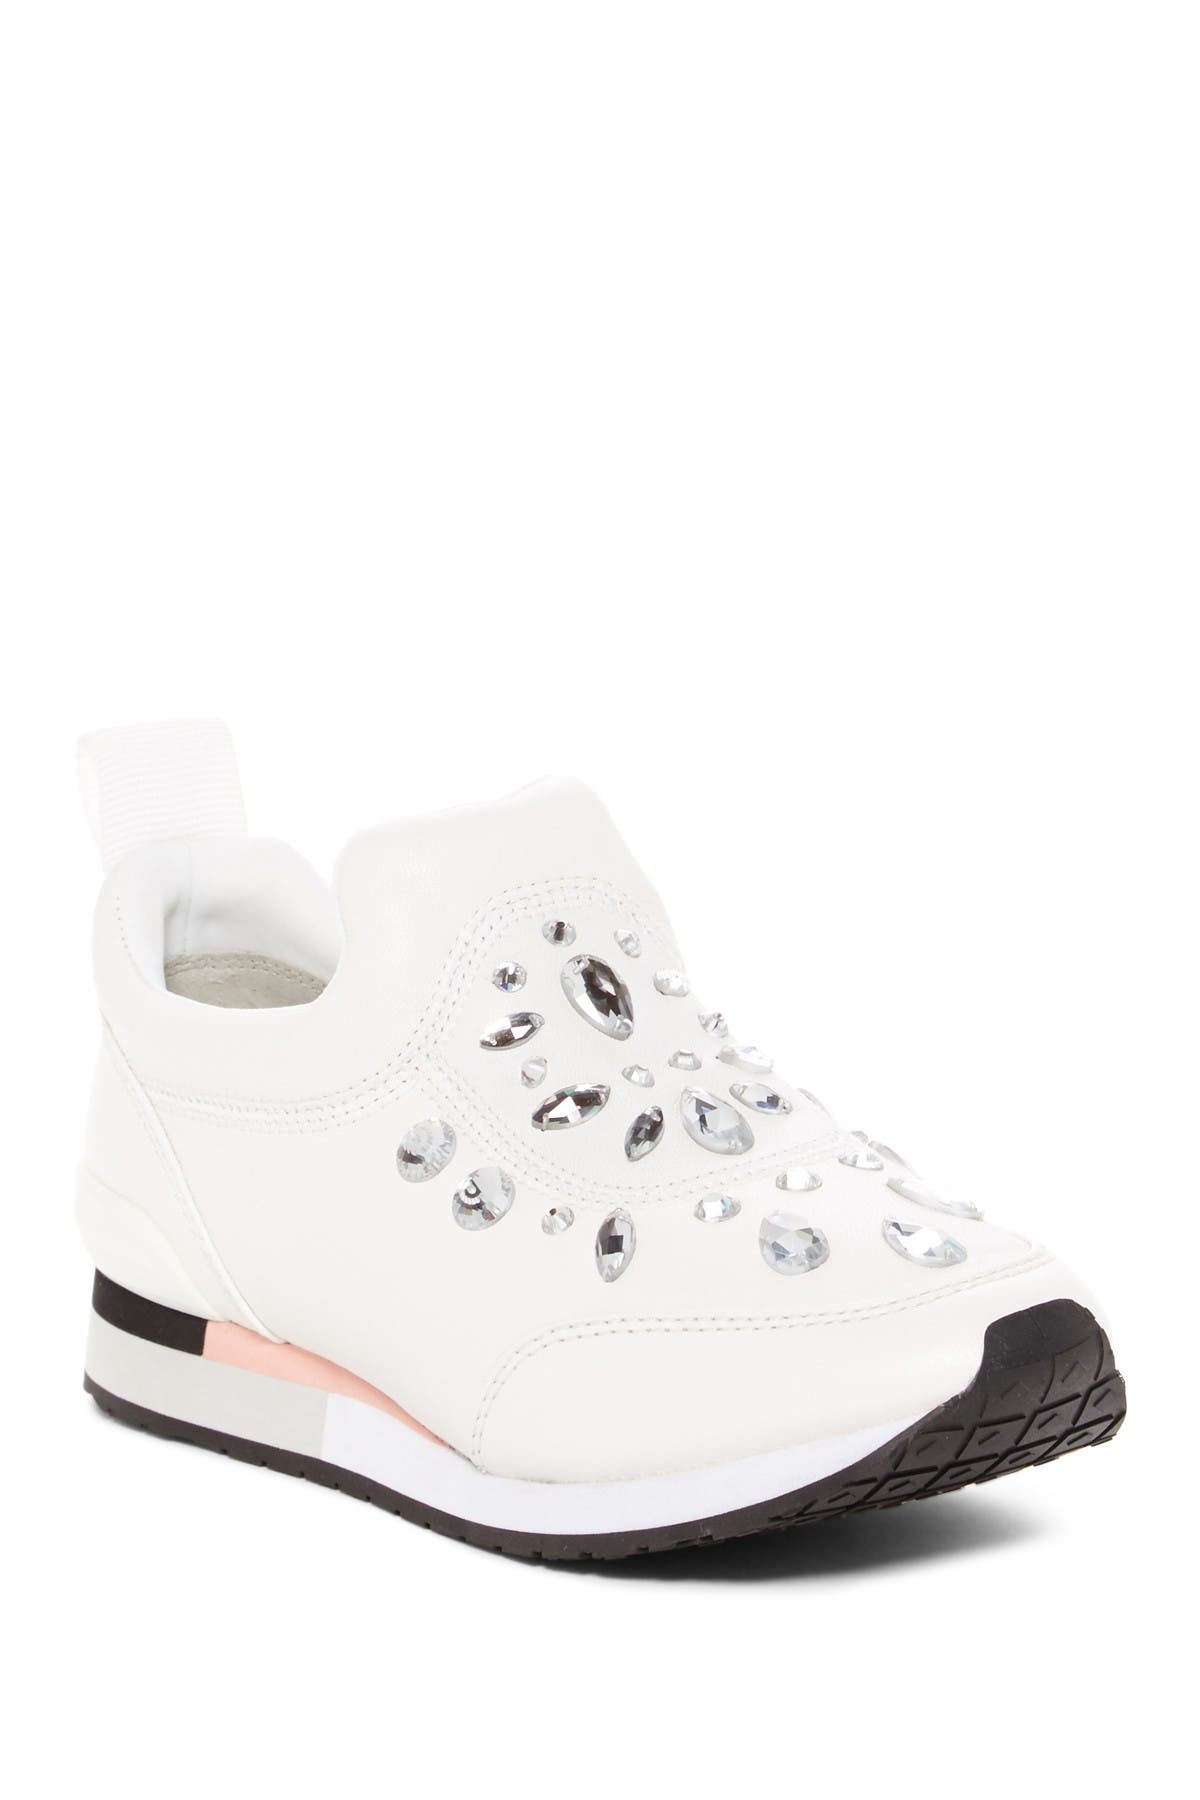 tory burch embellished sneakers